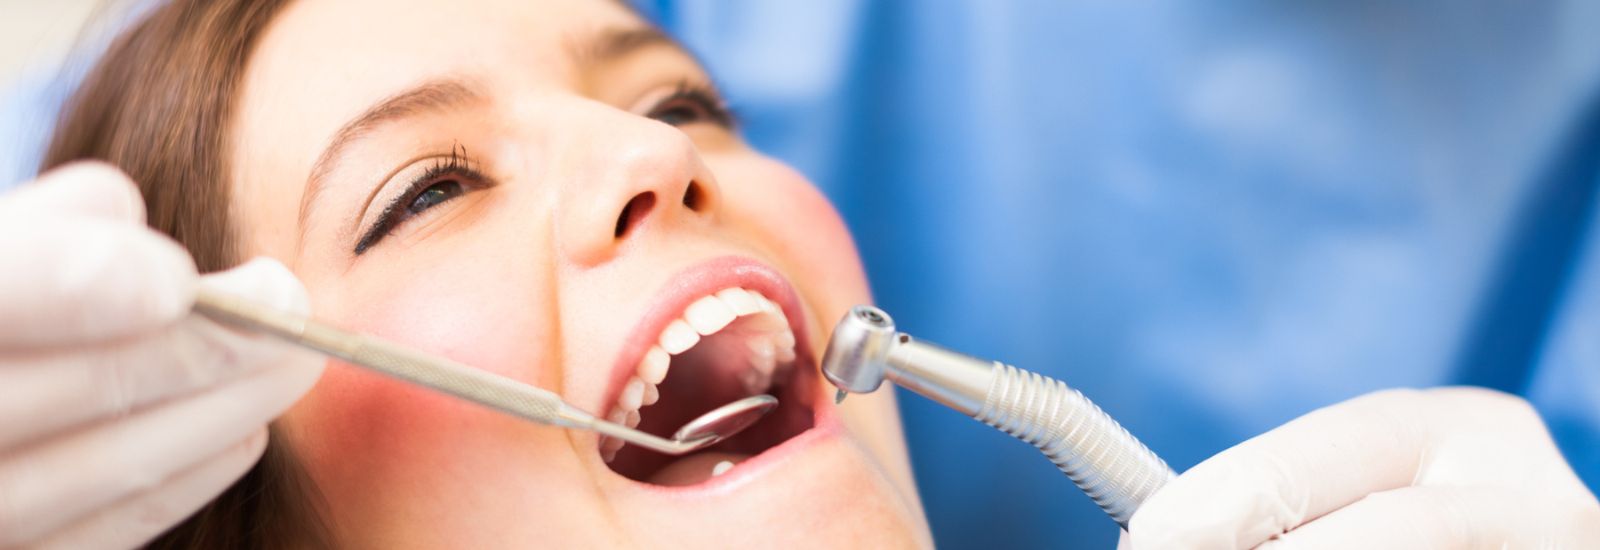 Dentist examining patients mouth